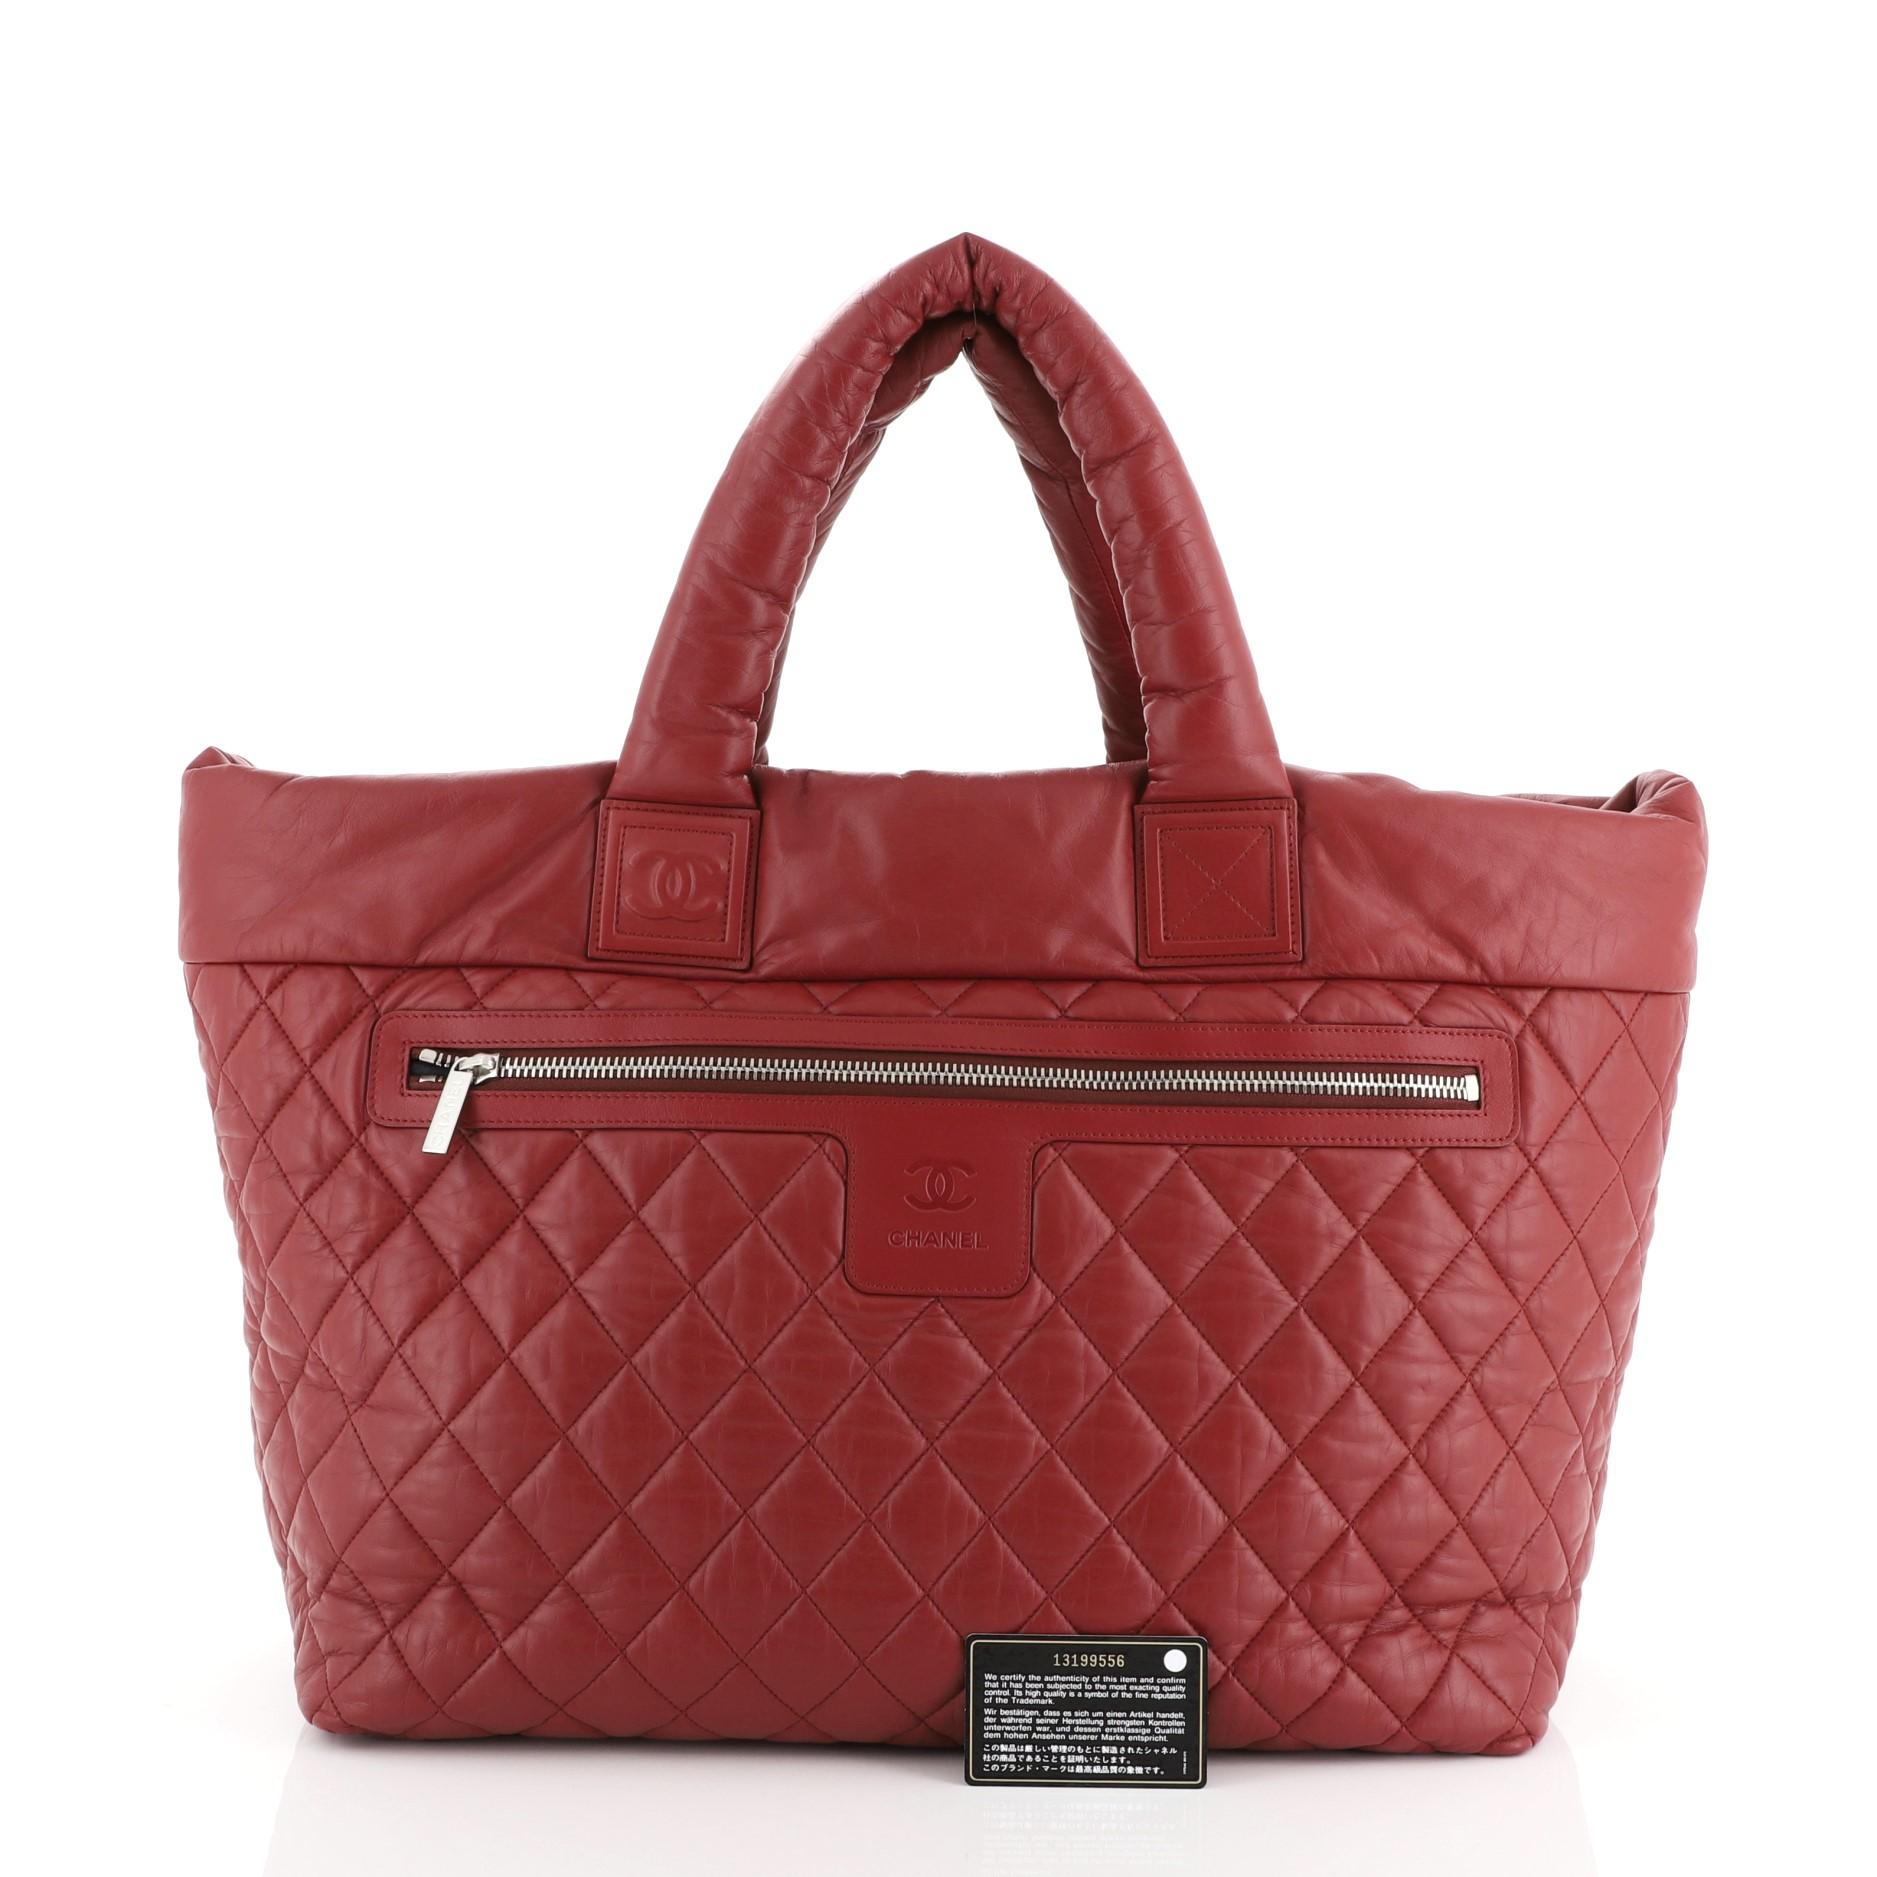 This Chanel Coco Cocoon Reversible Tote Quilted Lambskin Large, crafted from red lambskin leather, this sporty-chic tote features dual padded top handles, interlocking CC logo design, leather trims and silver-tone hardware accents. Its clasp closure